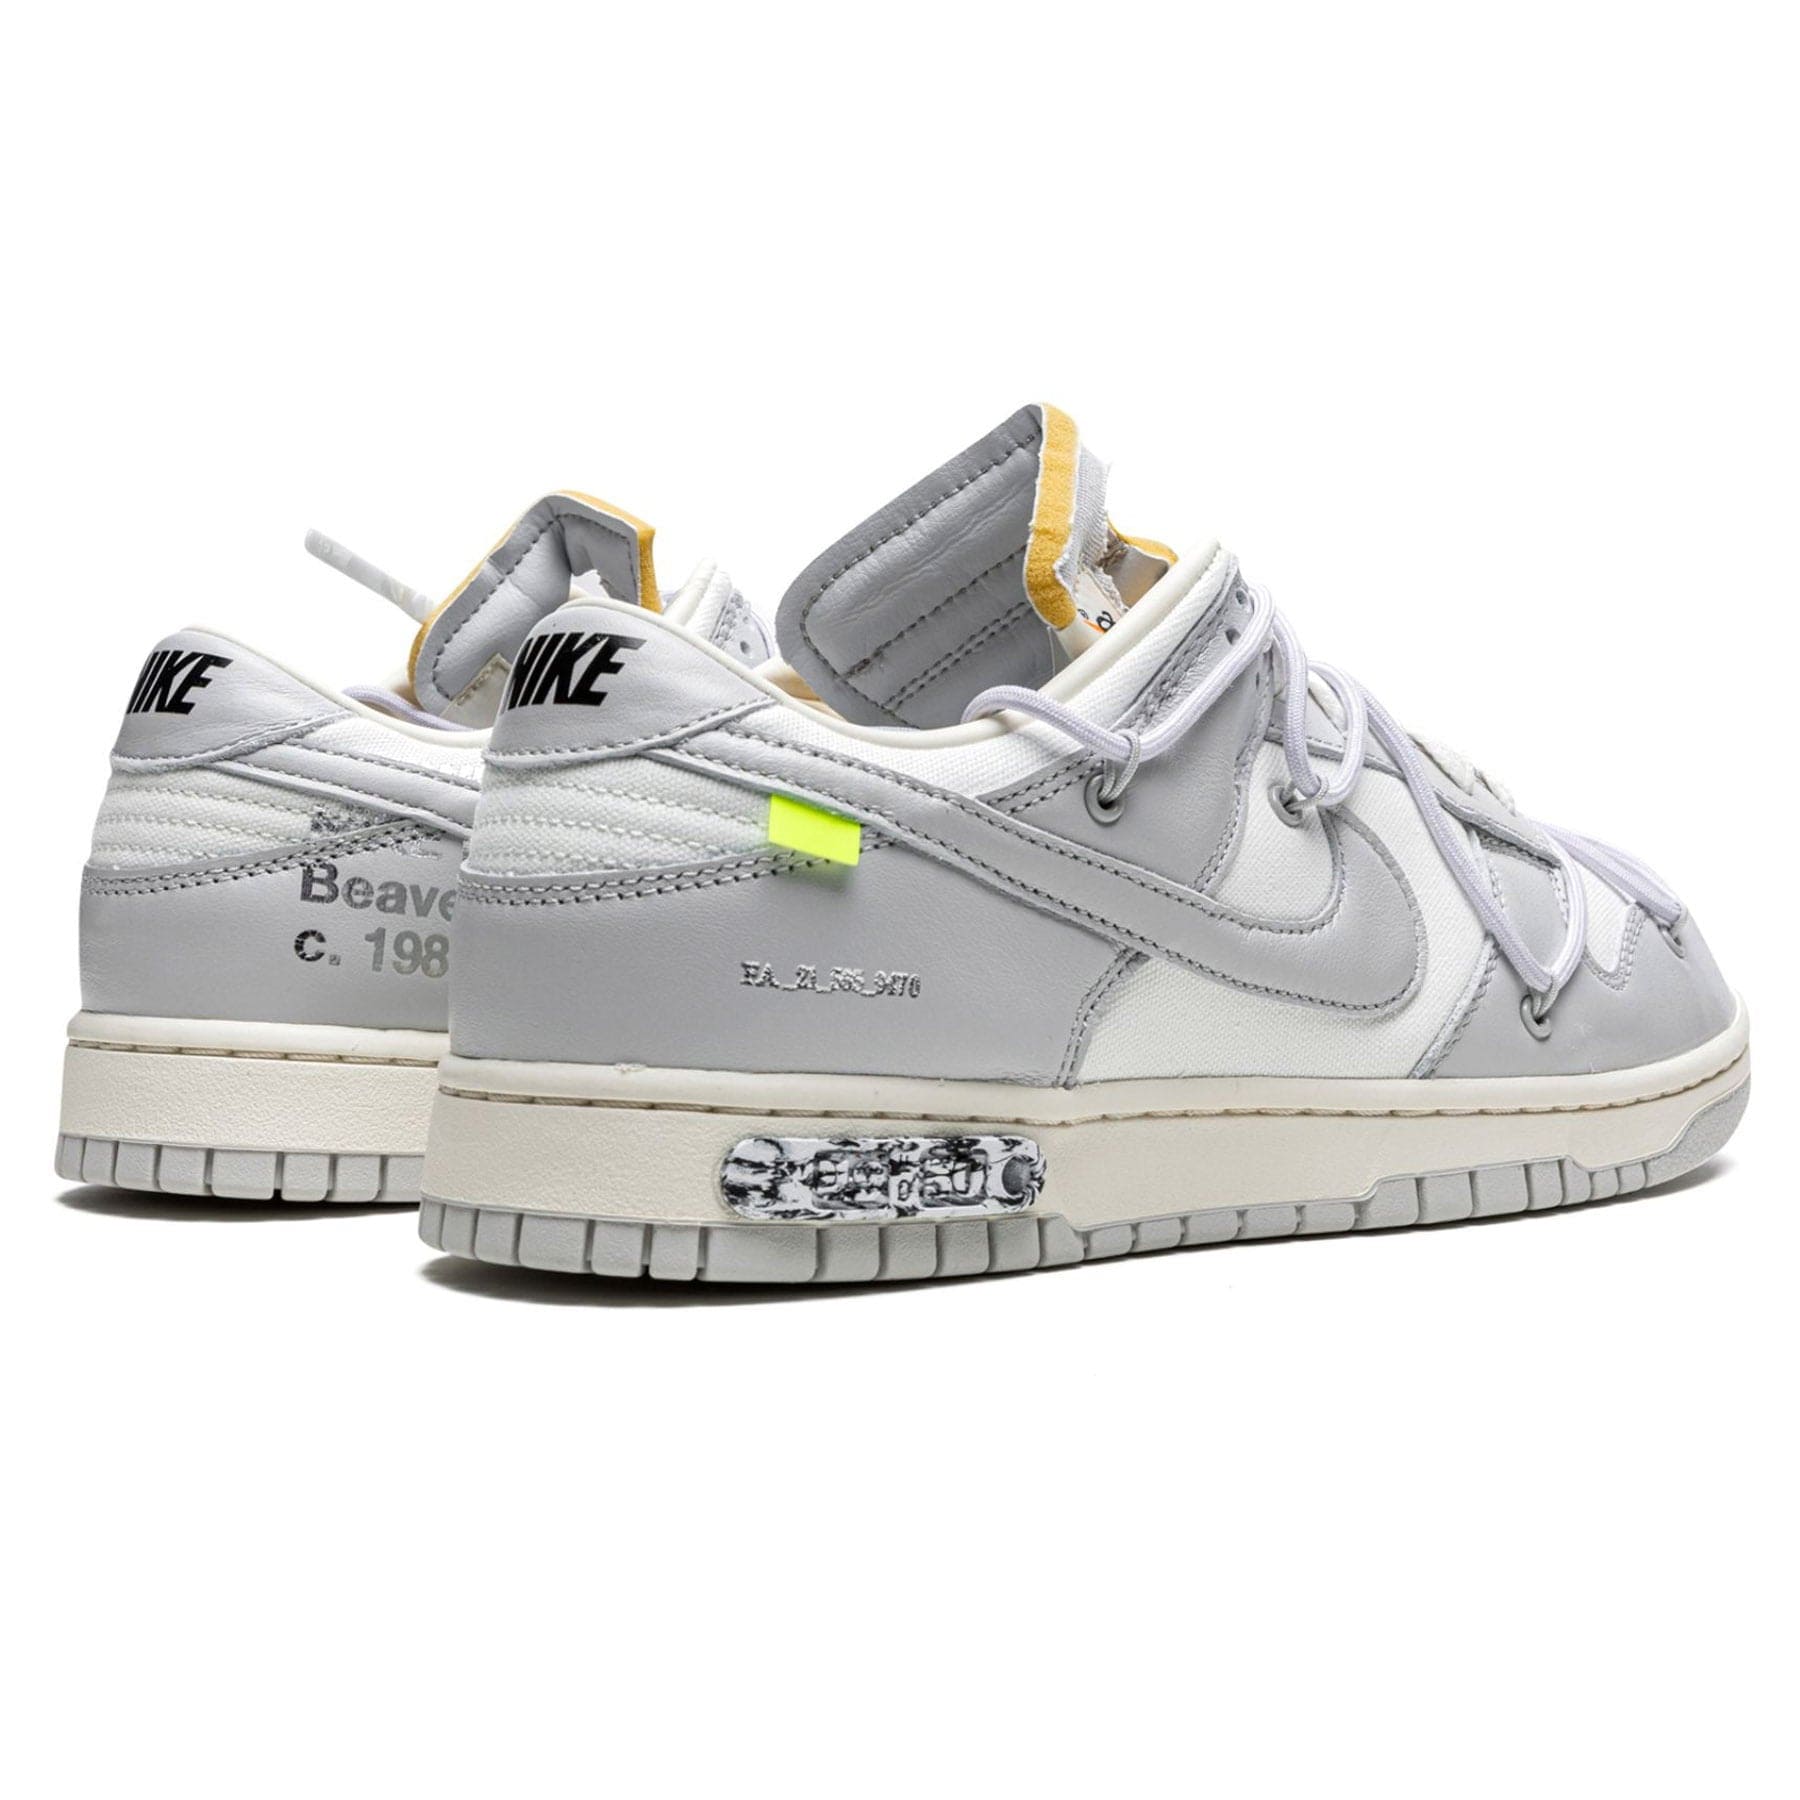 Off-White x Nike Dunk Low ‘Lot 49 of 50’ - JustinBie Lux